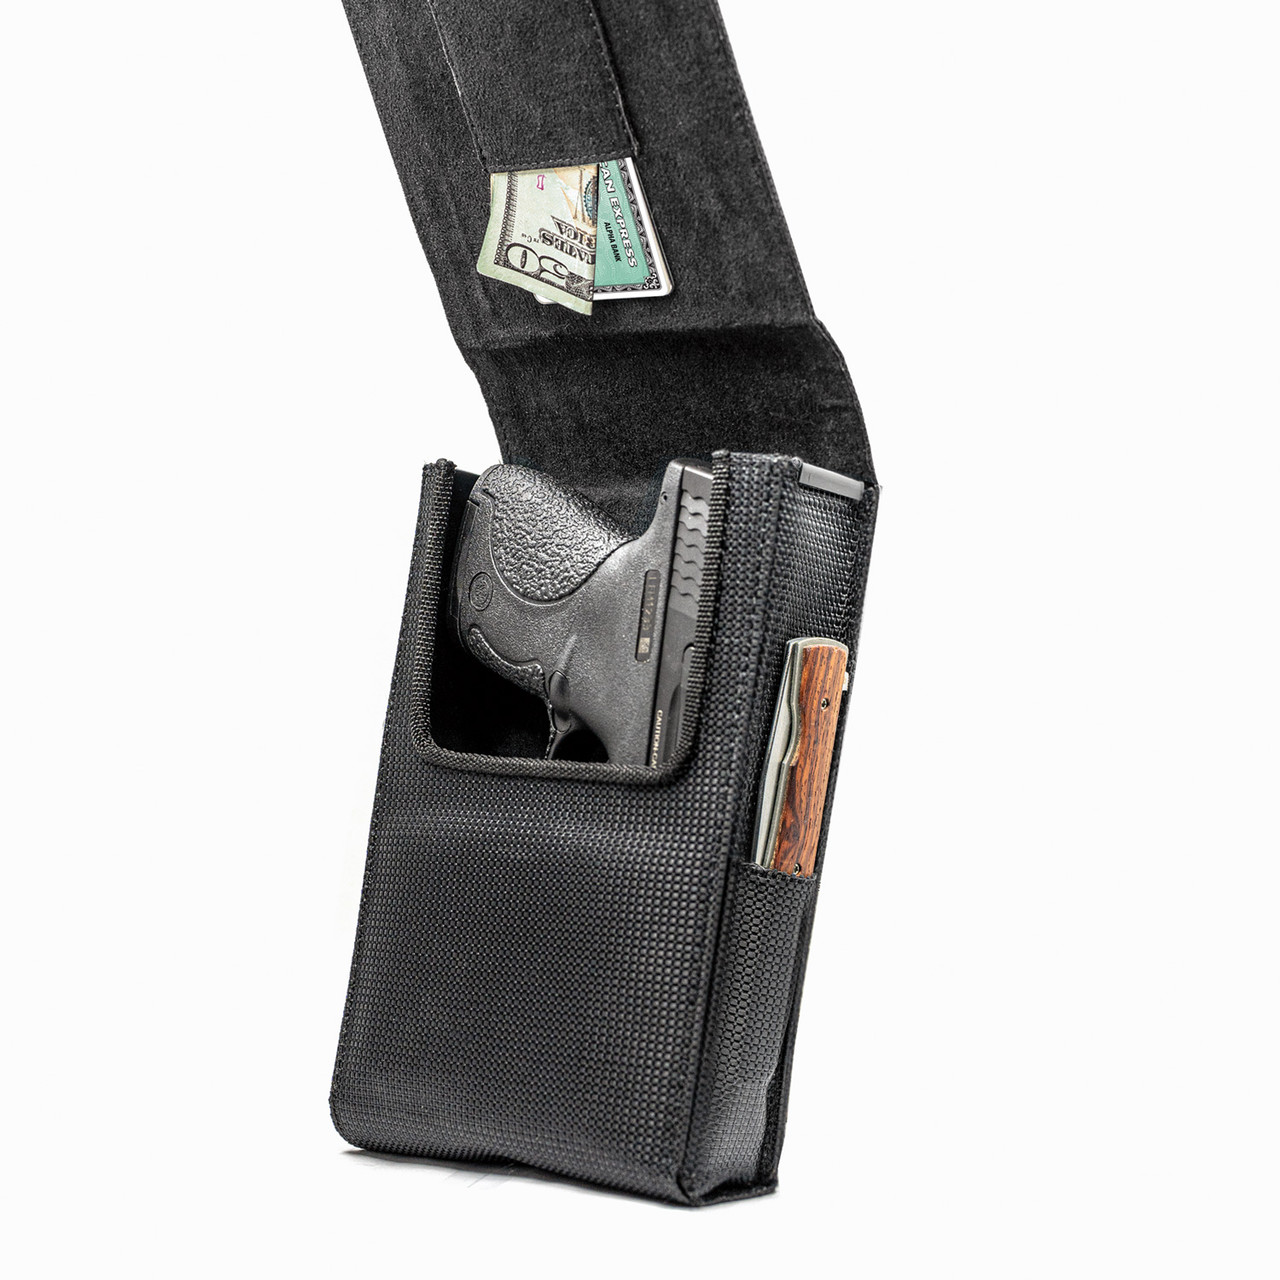 The M&P Shield PLUS Perfect Holster